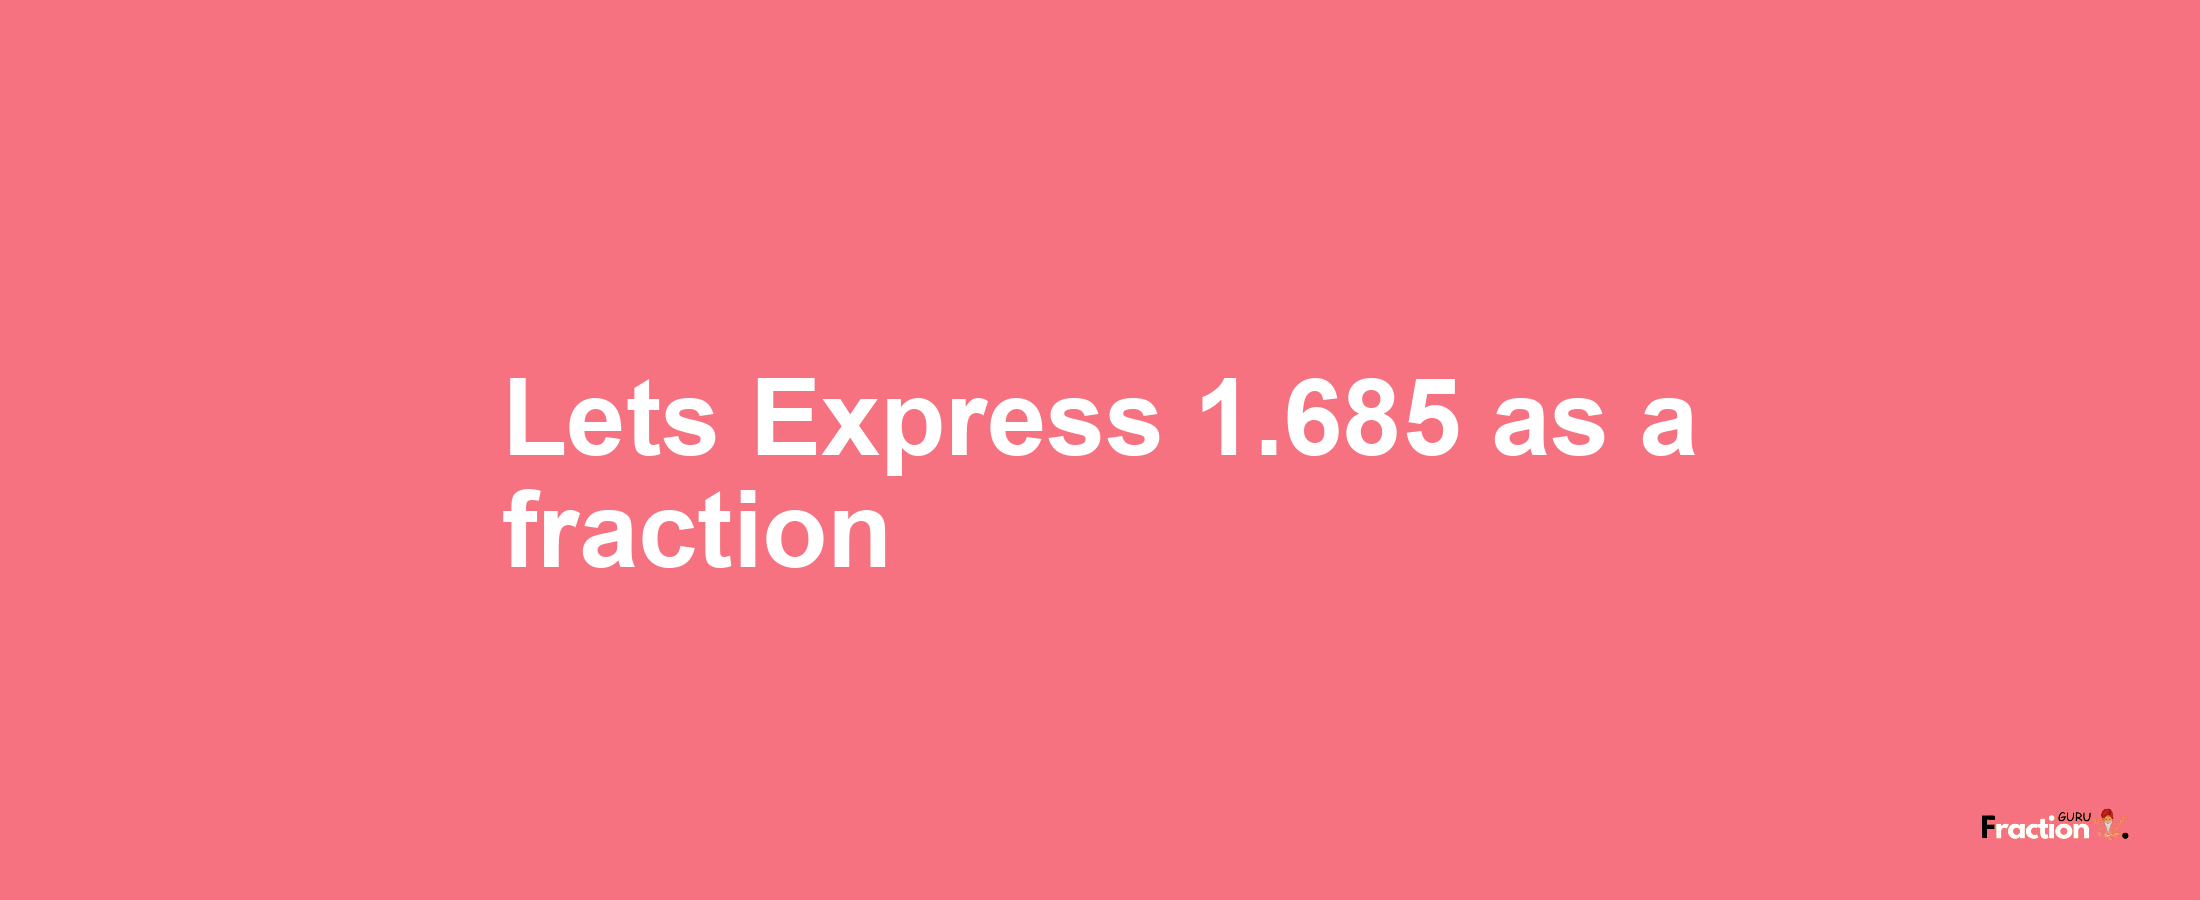 Lets Express 1.685 as afraction